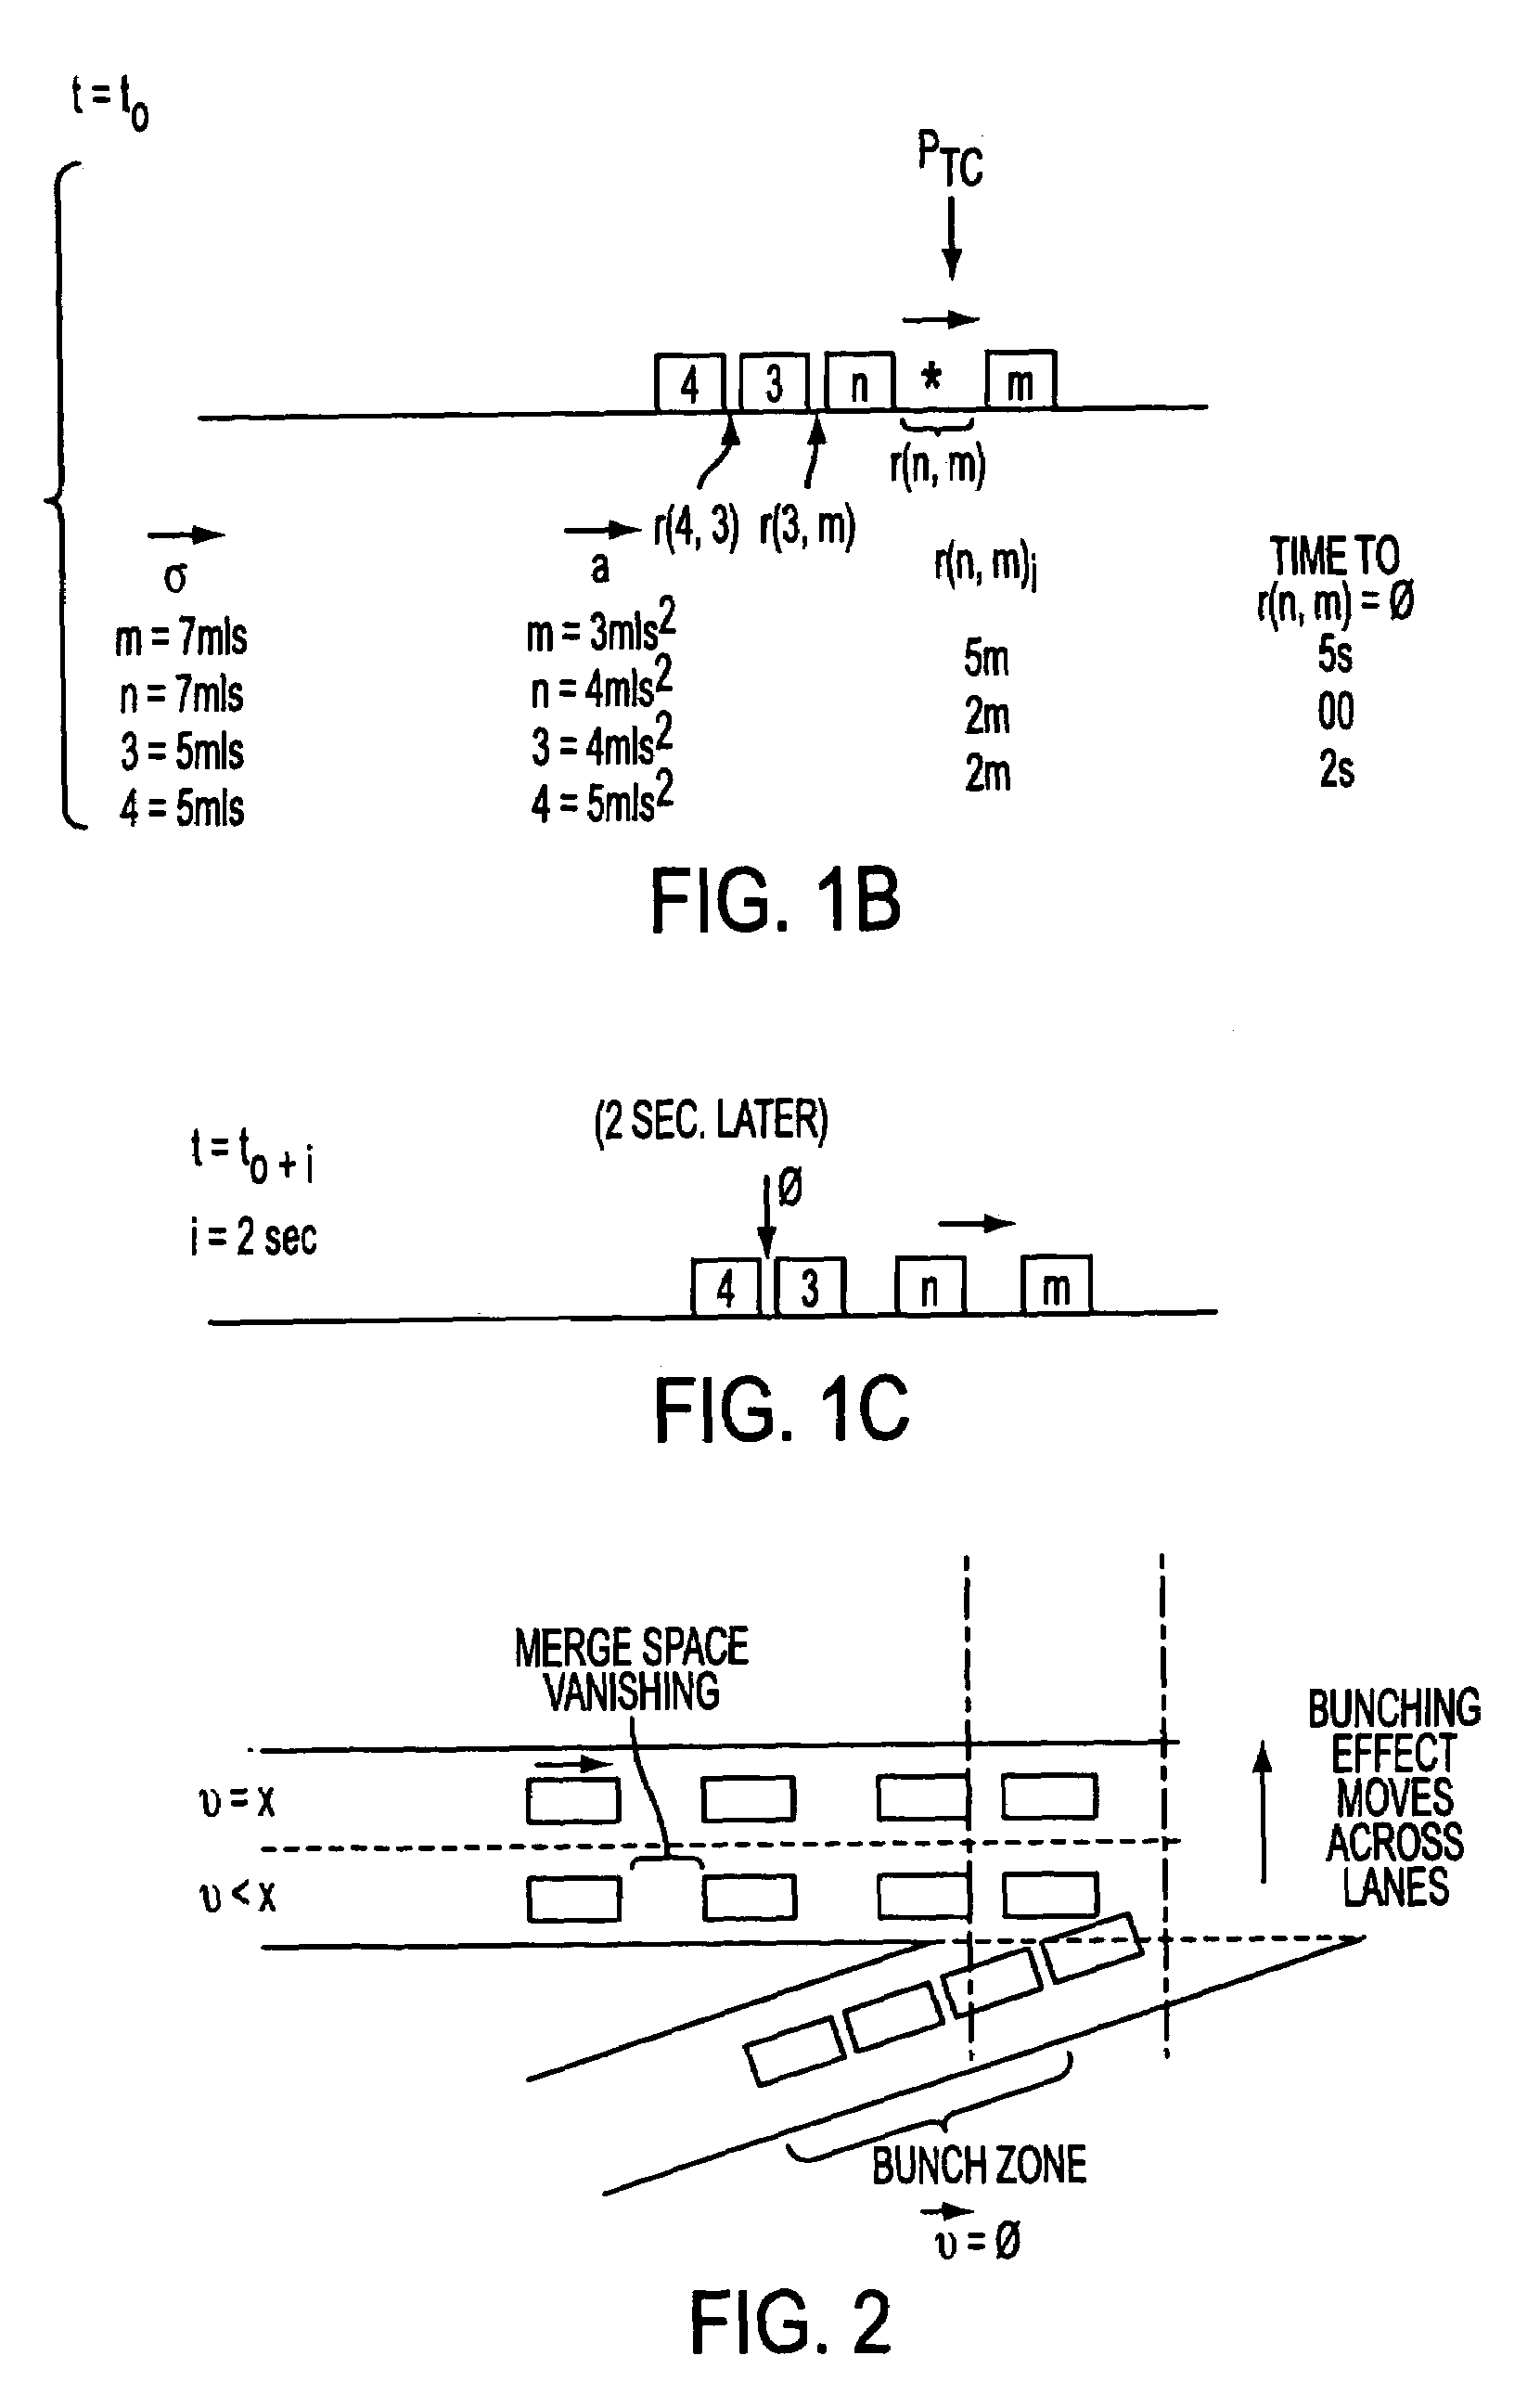 Traffic control systems for vehicle spacing to dissipate traffic gridlock